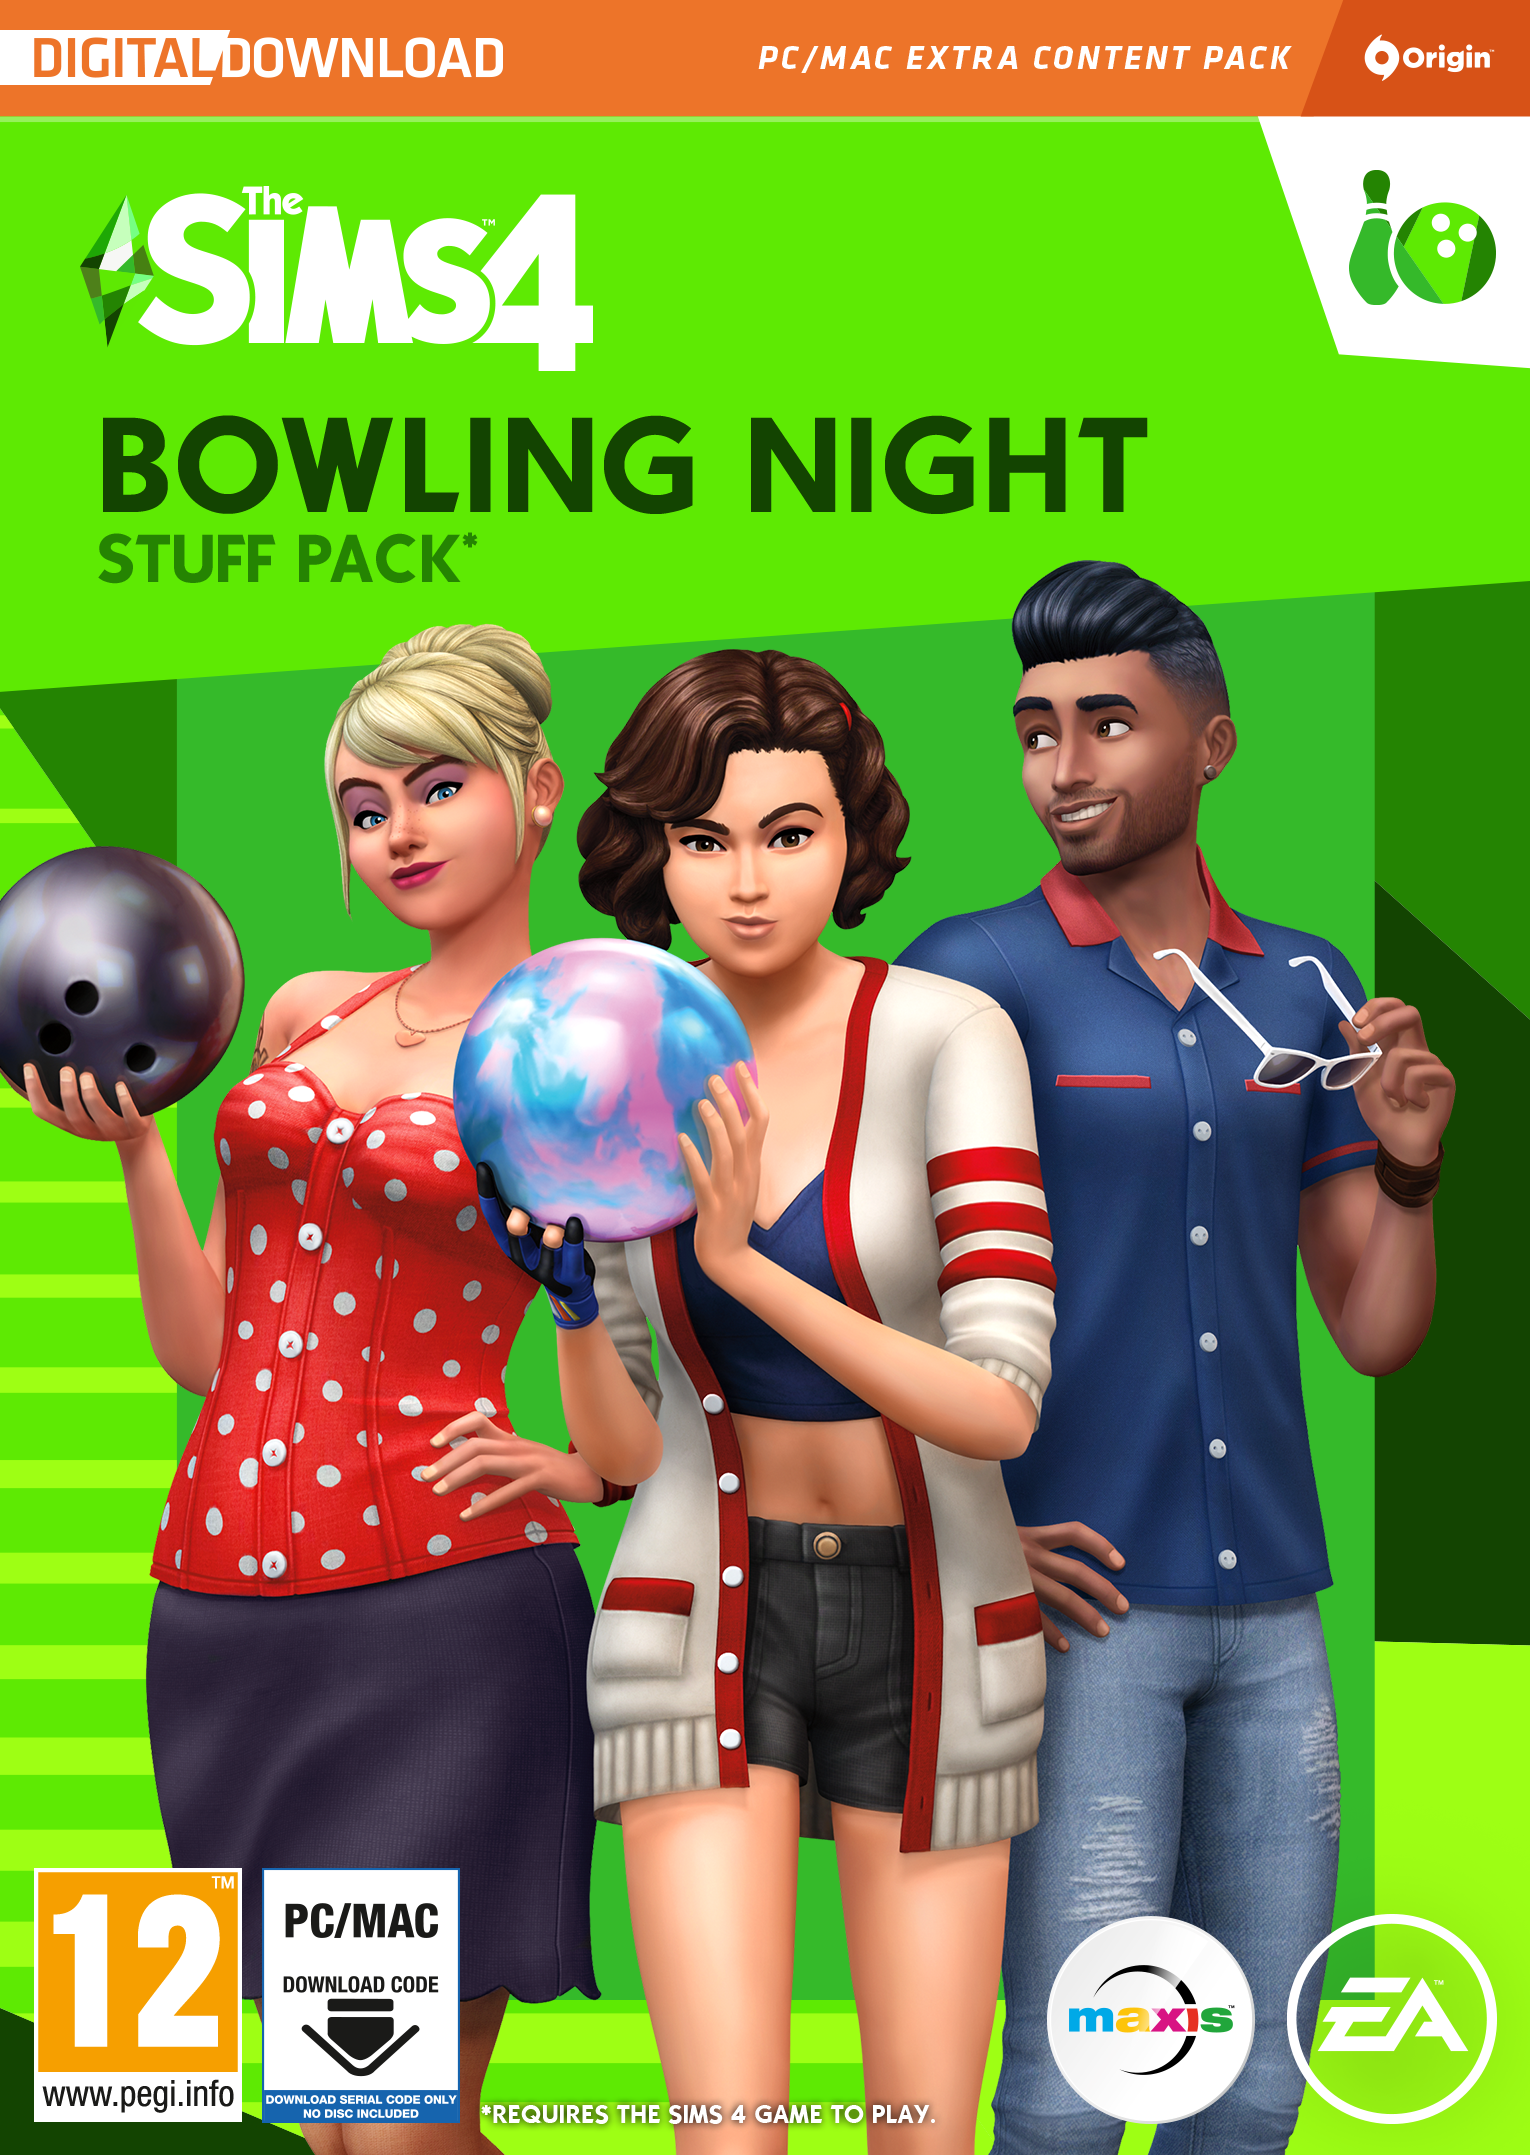 THE SIMS 4 (SP10) BOWLING NIGHT STUFF